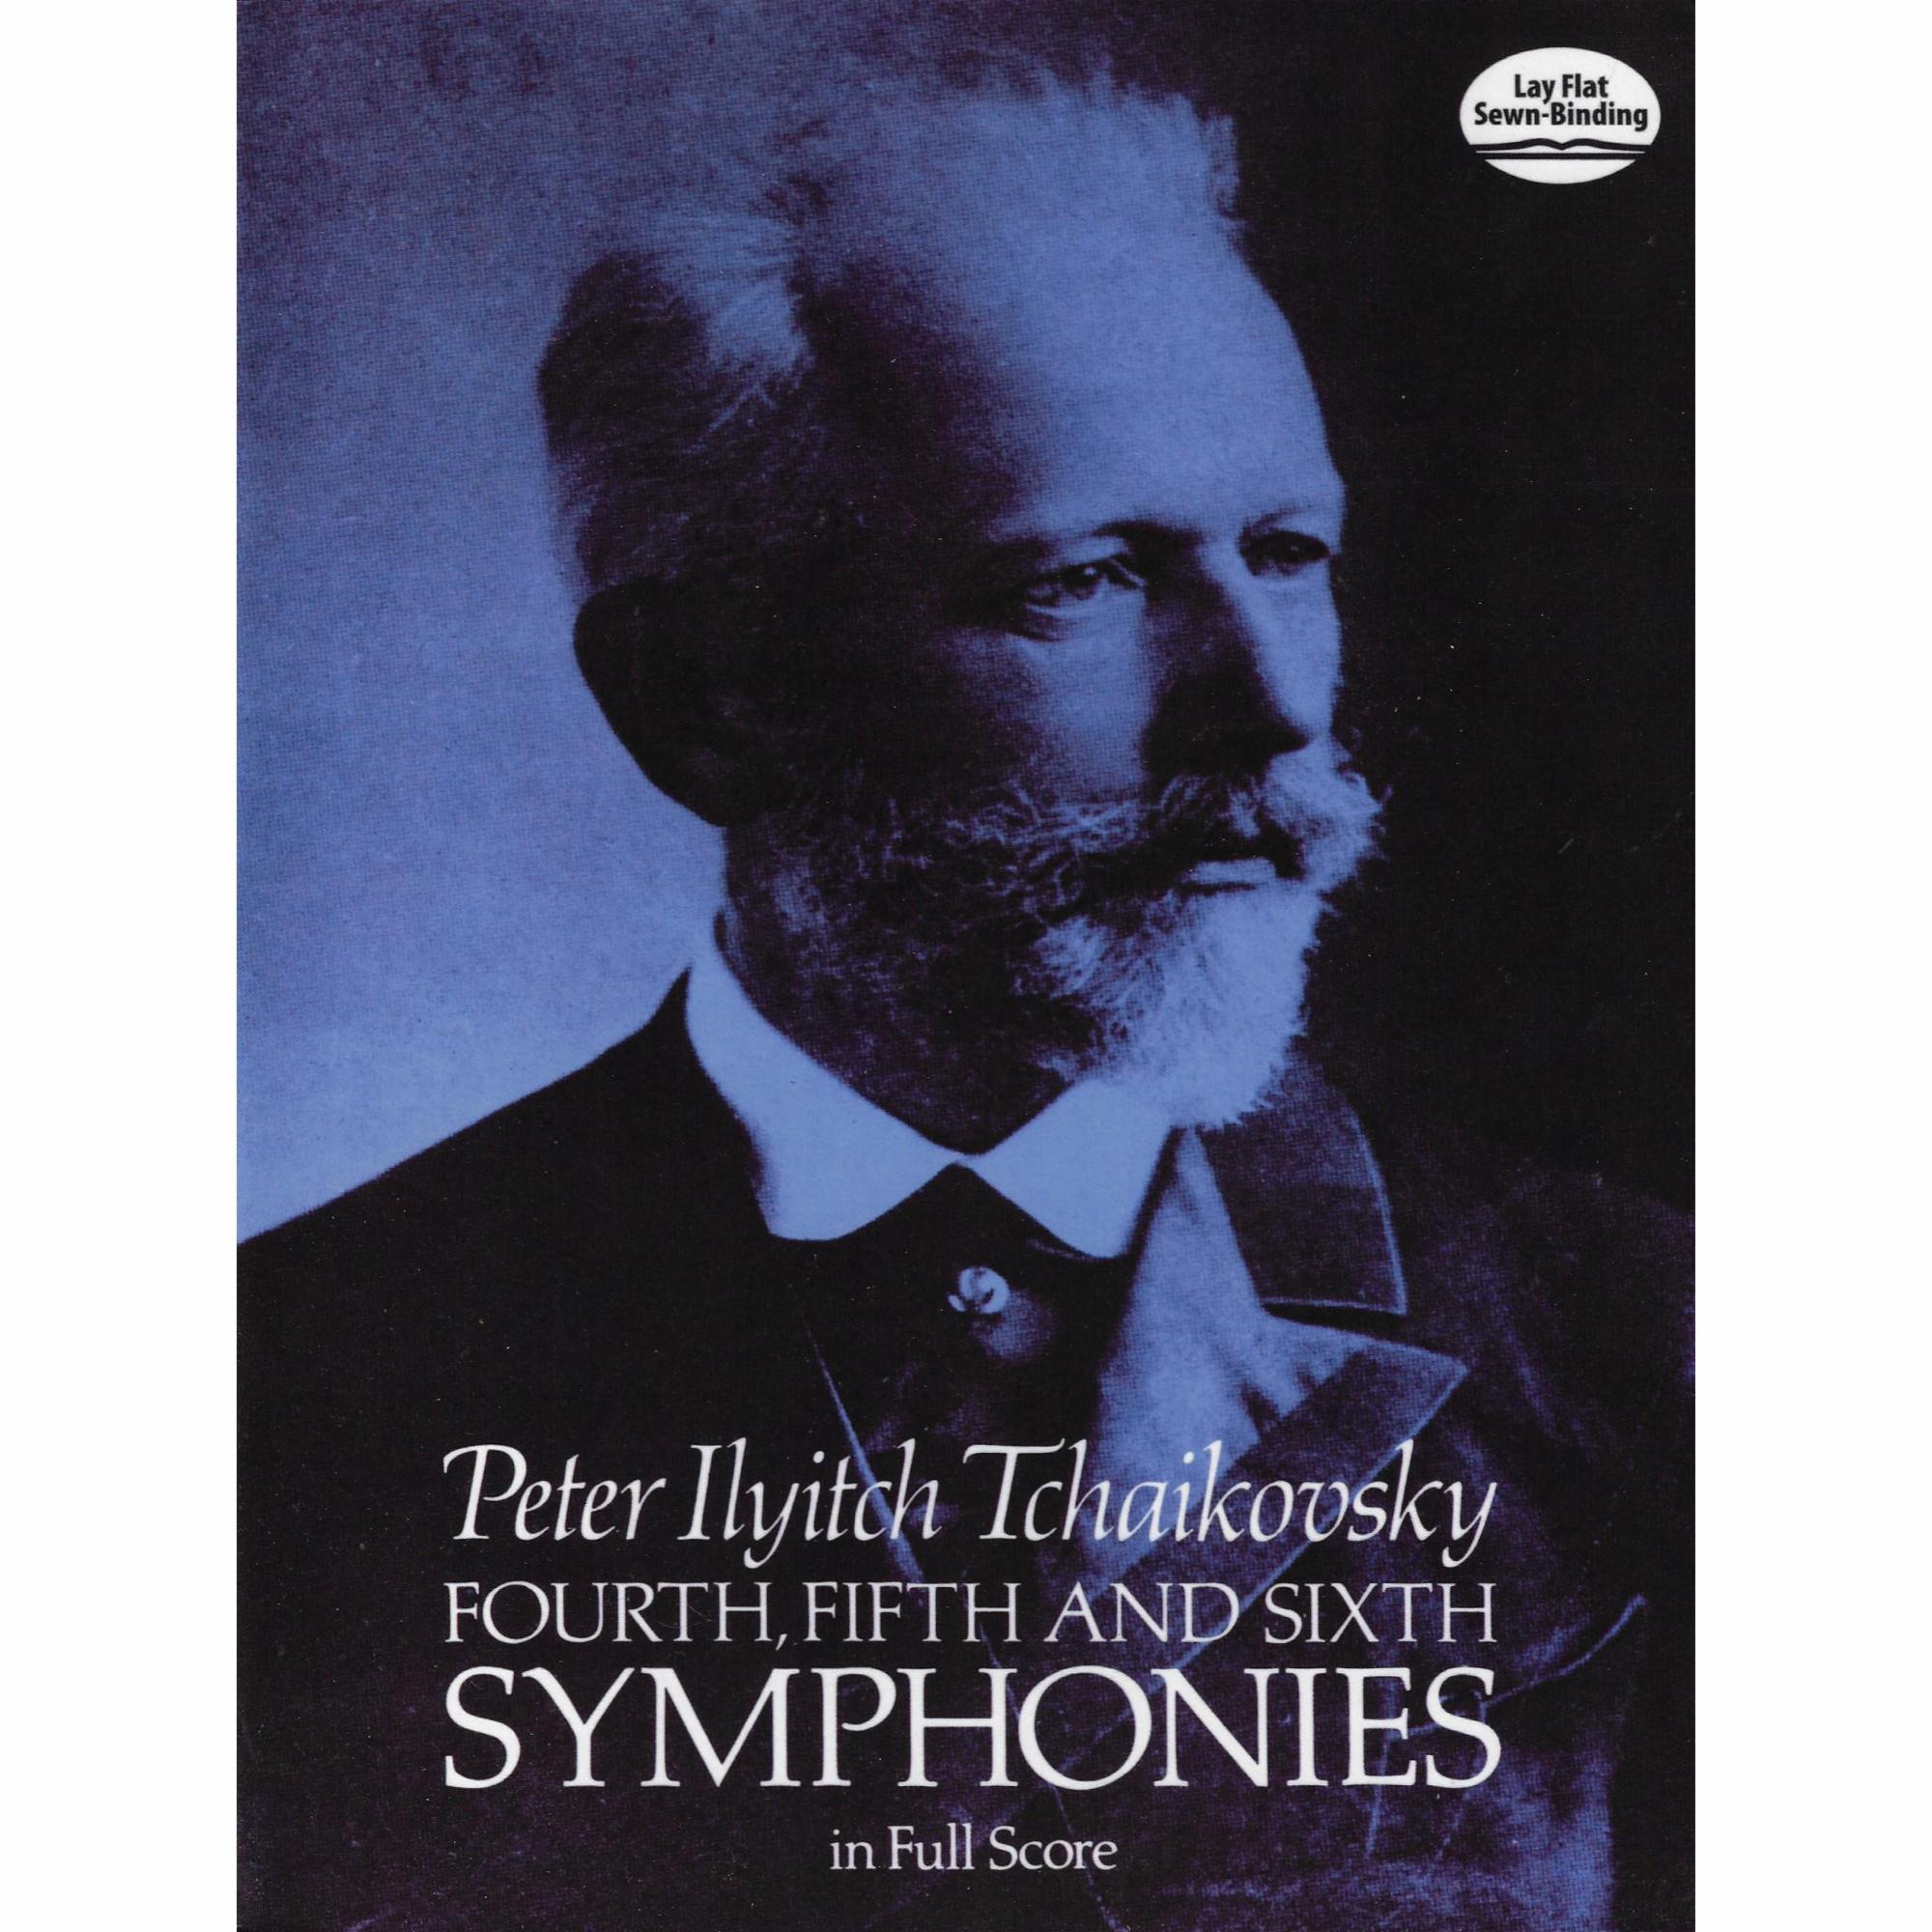 Tchaikovsky -- Fourth, Fifth and Sixth Symphonies in Full Score